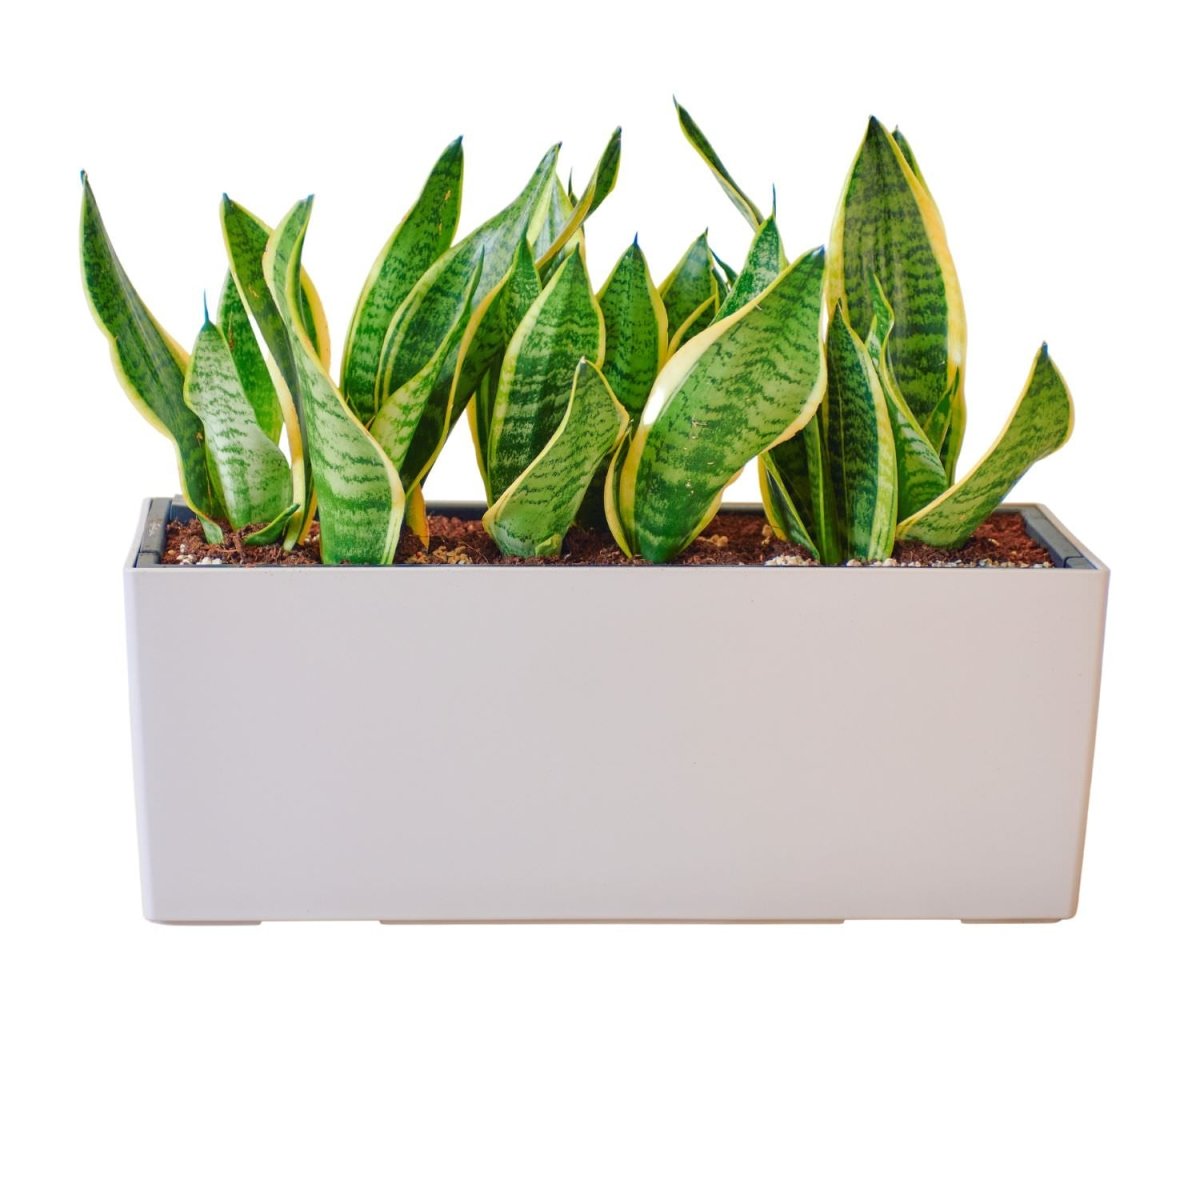 Sansevieria Potted In Lechuza Balconera Planter - Sand Brown - My City Plants